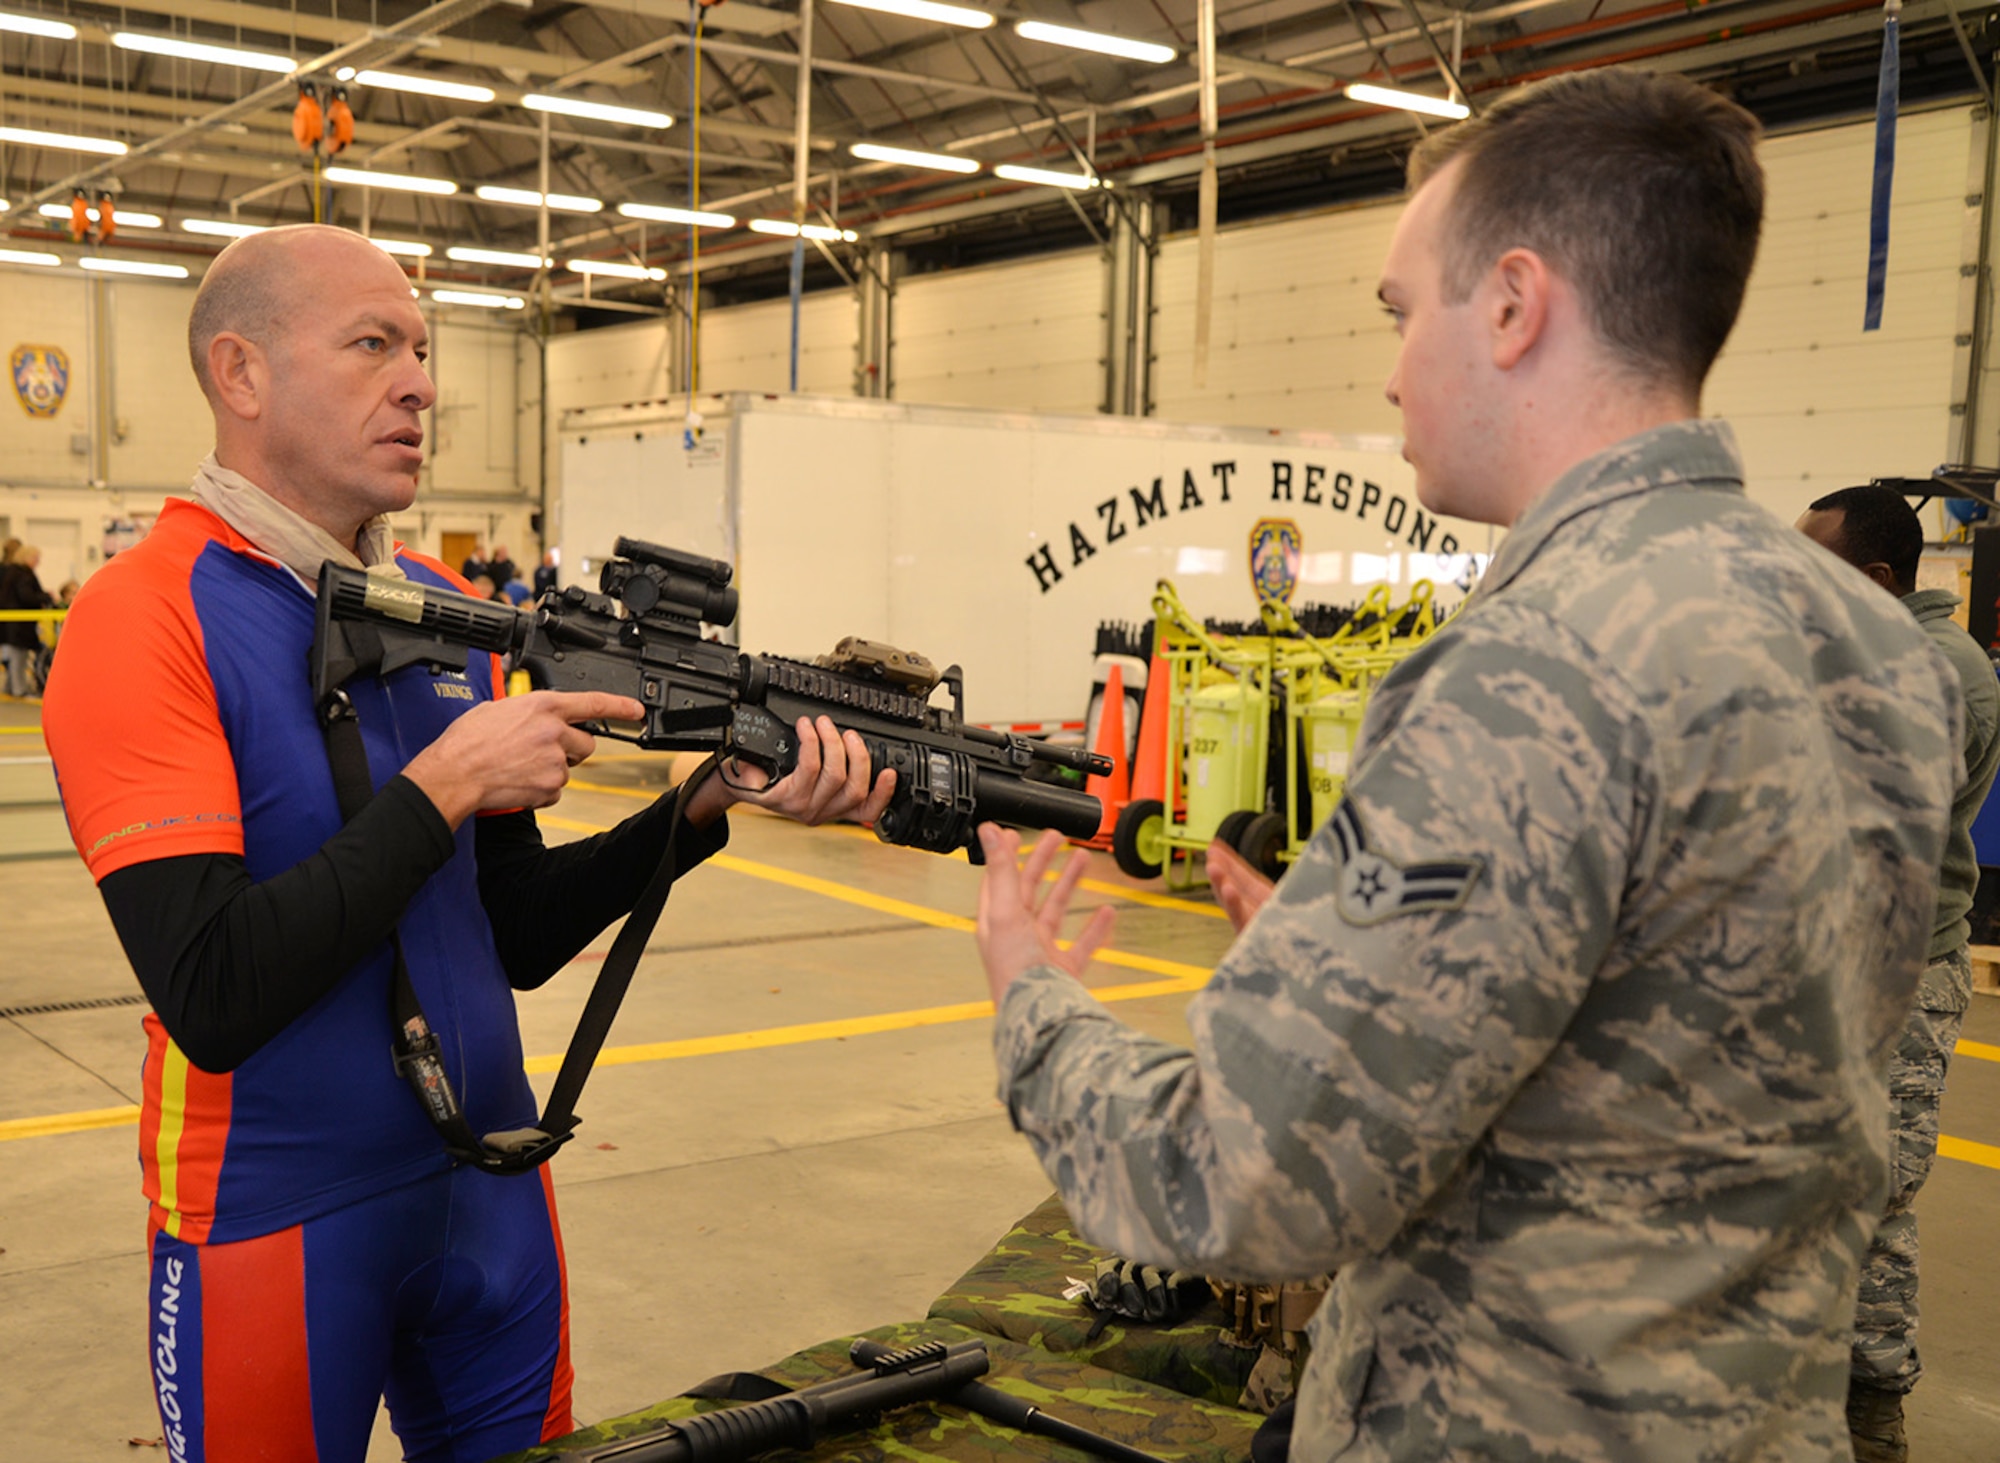 Wayne Harrod, left, amputee and retired British Army infantryman and long-distance cyclist, discusses military weapons with Airman 1st Class Kyle Reppucci, 100th Security Forces Squadron response force member, at the Steel Bones event Oct. 24, 2016, on RAF Mildenhall, England. Steel Bones is a local British organization similar to the Wounded Warrior Program, specifically aimed at amputees and their families. (U.S. Air Force photo by Karen Abeyasekere)